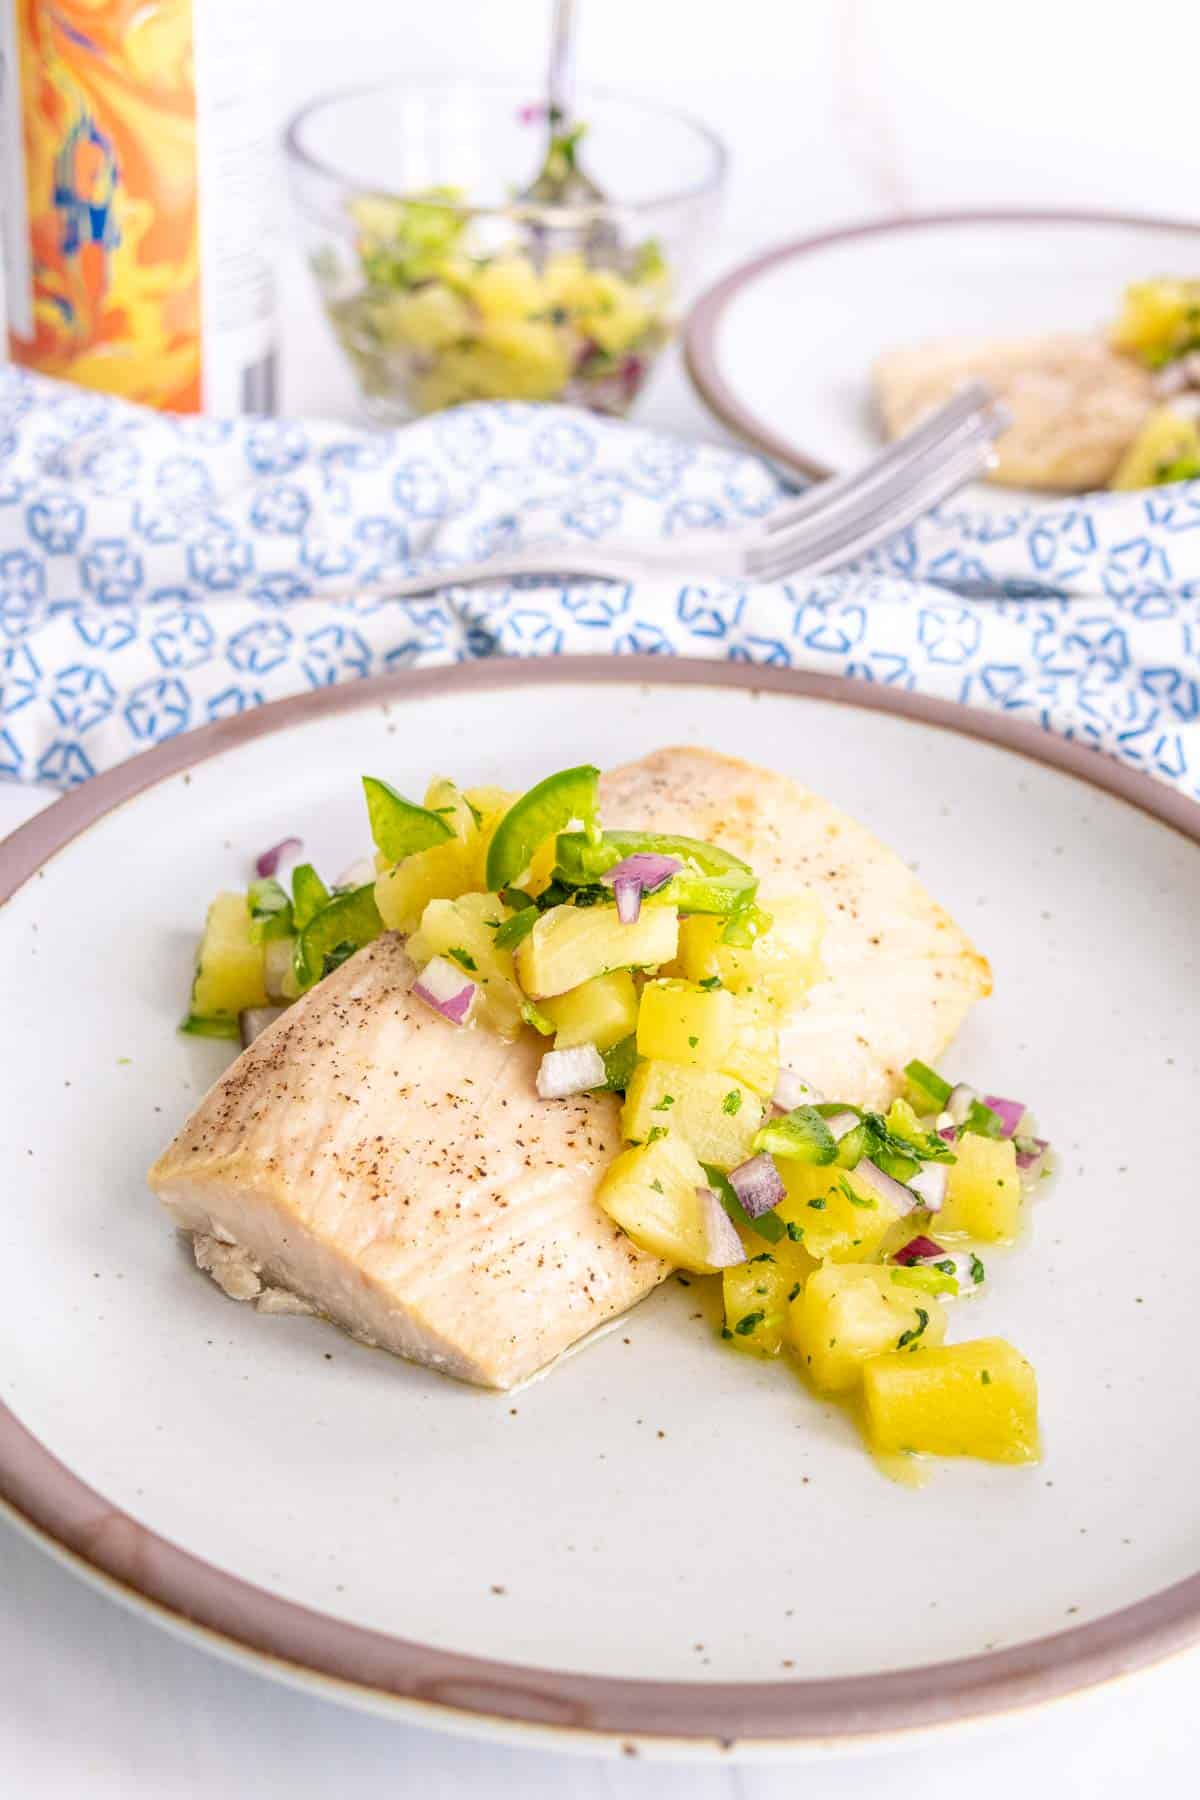 Mahi mahi topped with pineapple salsa served on a white plate with a blue patterned tablecloth, and a side salad in the background.